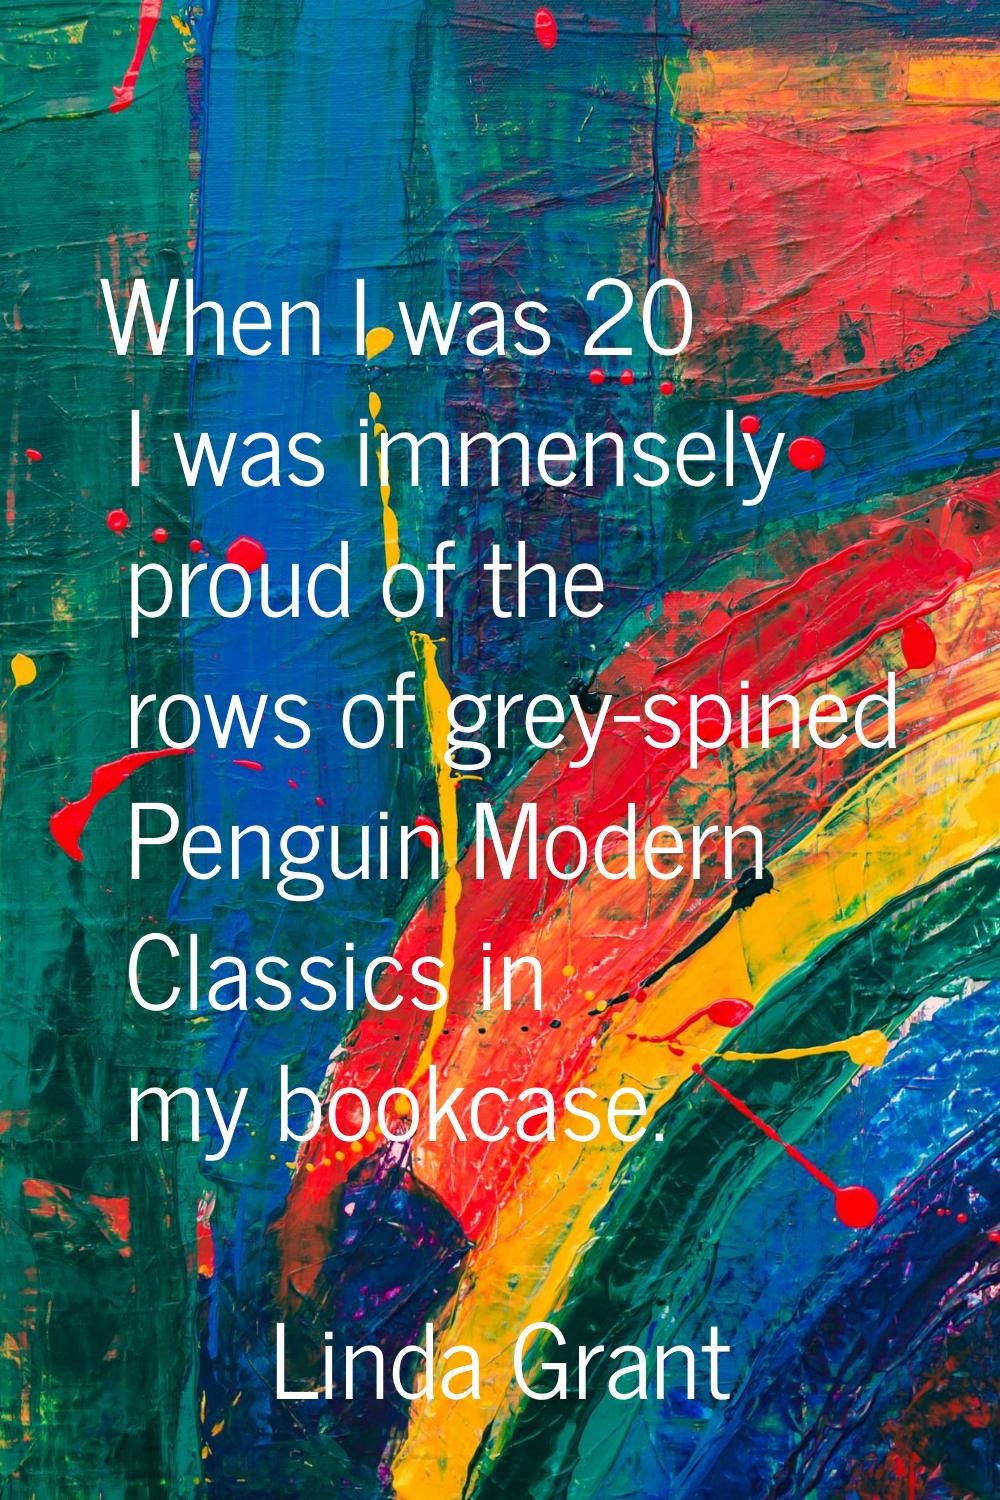 When I was 20 I was immensely proud of the rows of grey-spined Penguin Modern Classics in my bookca